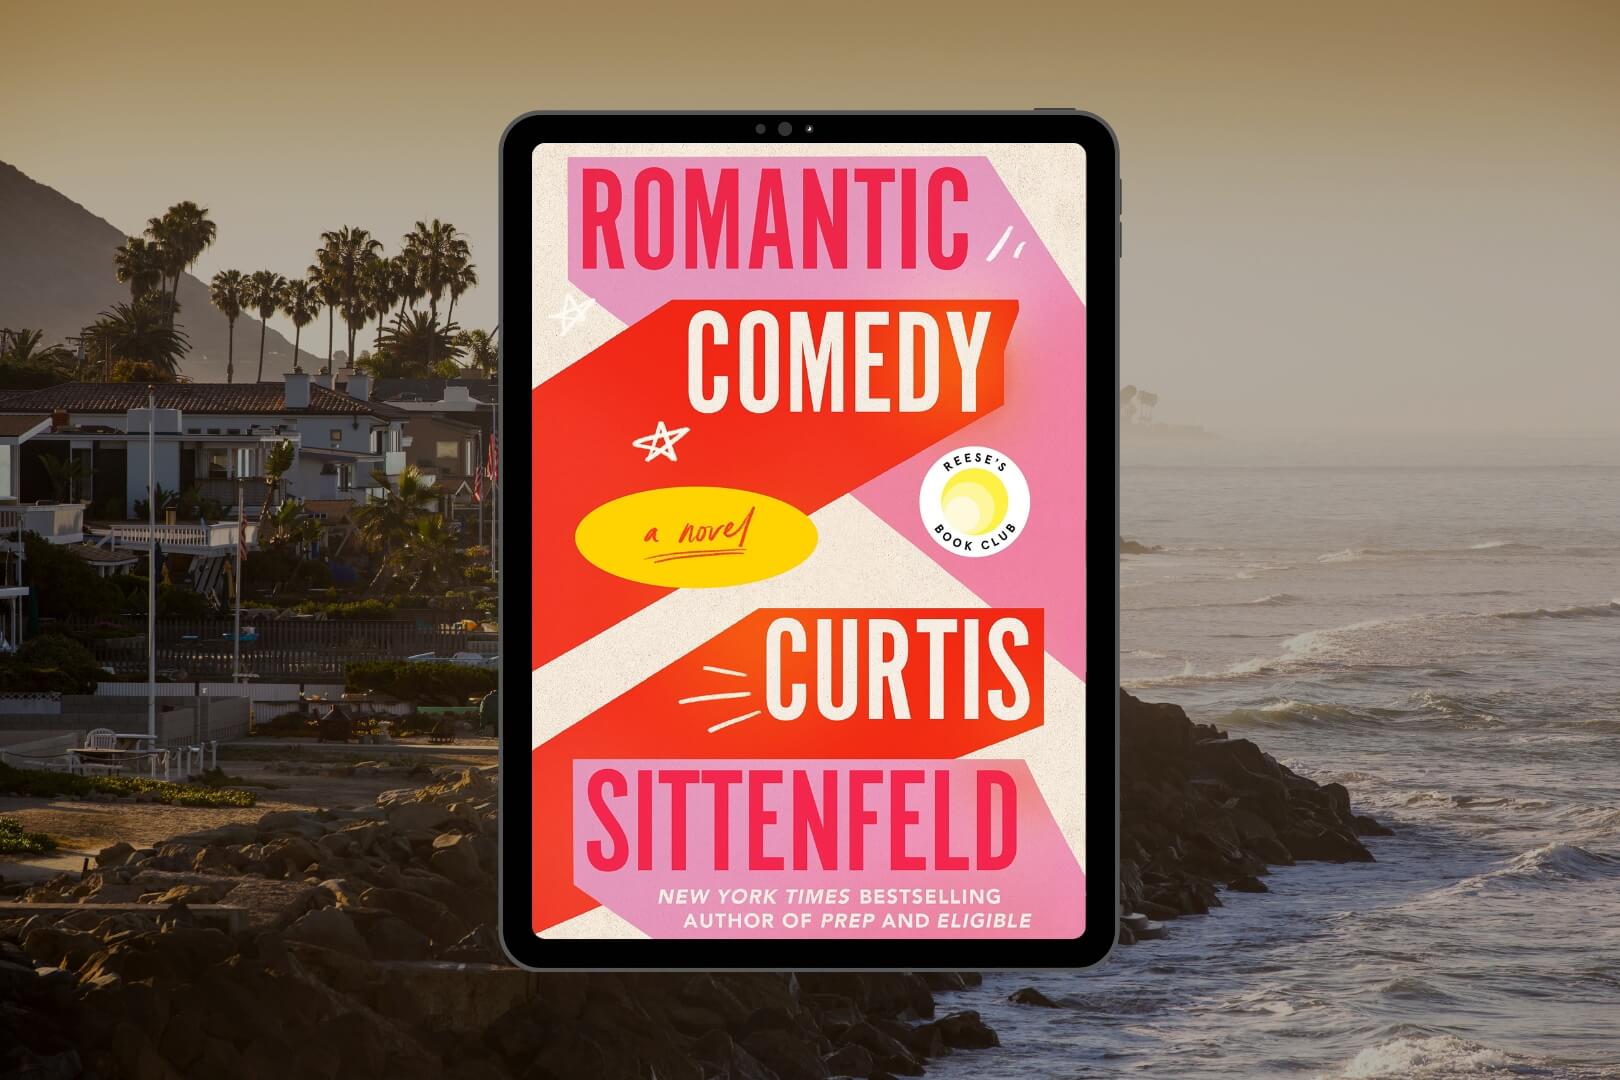 Book Club Questions for Romantic Comedy by Curtis Sittenfeld